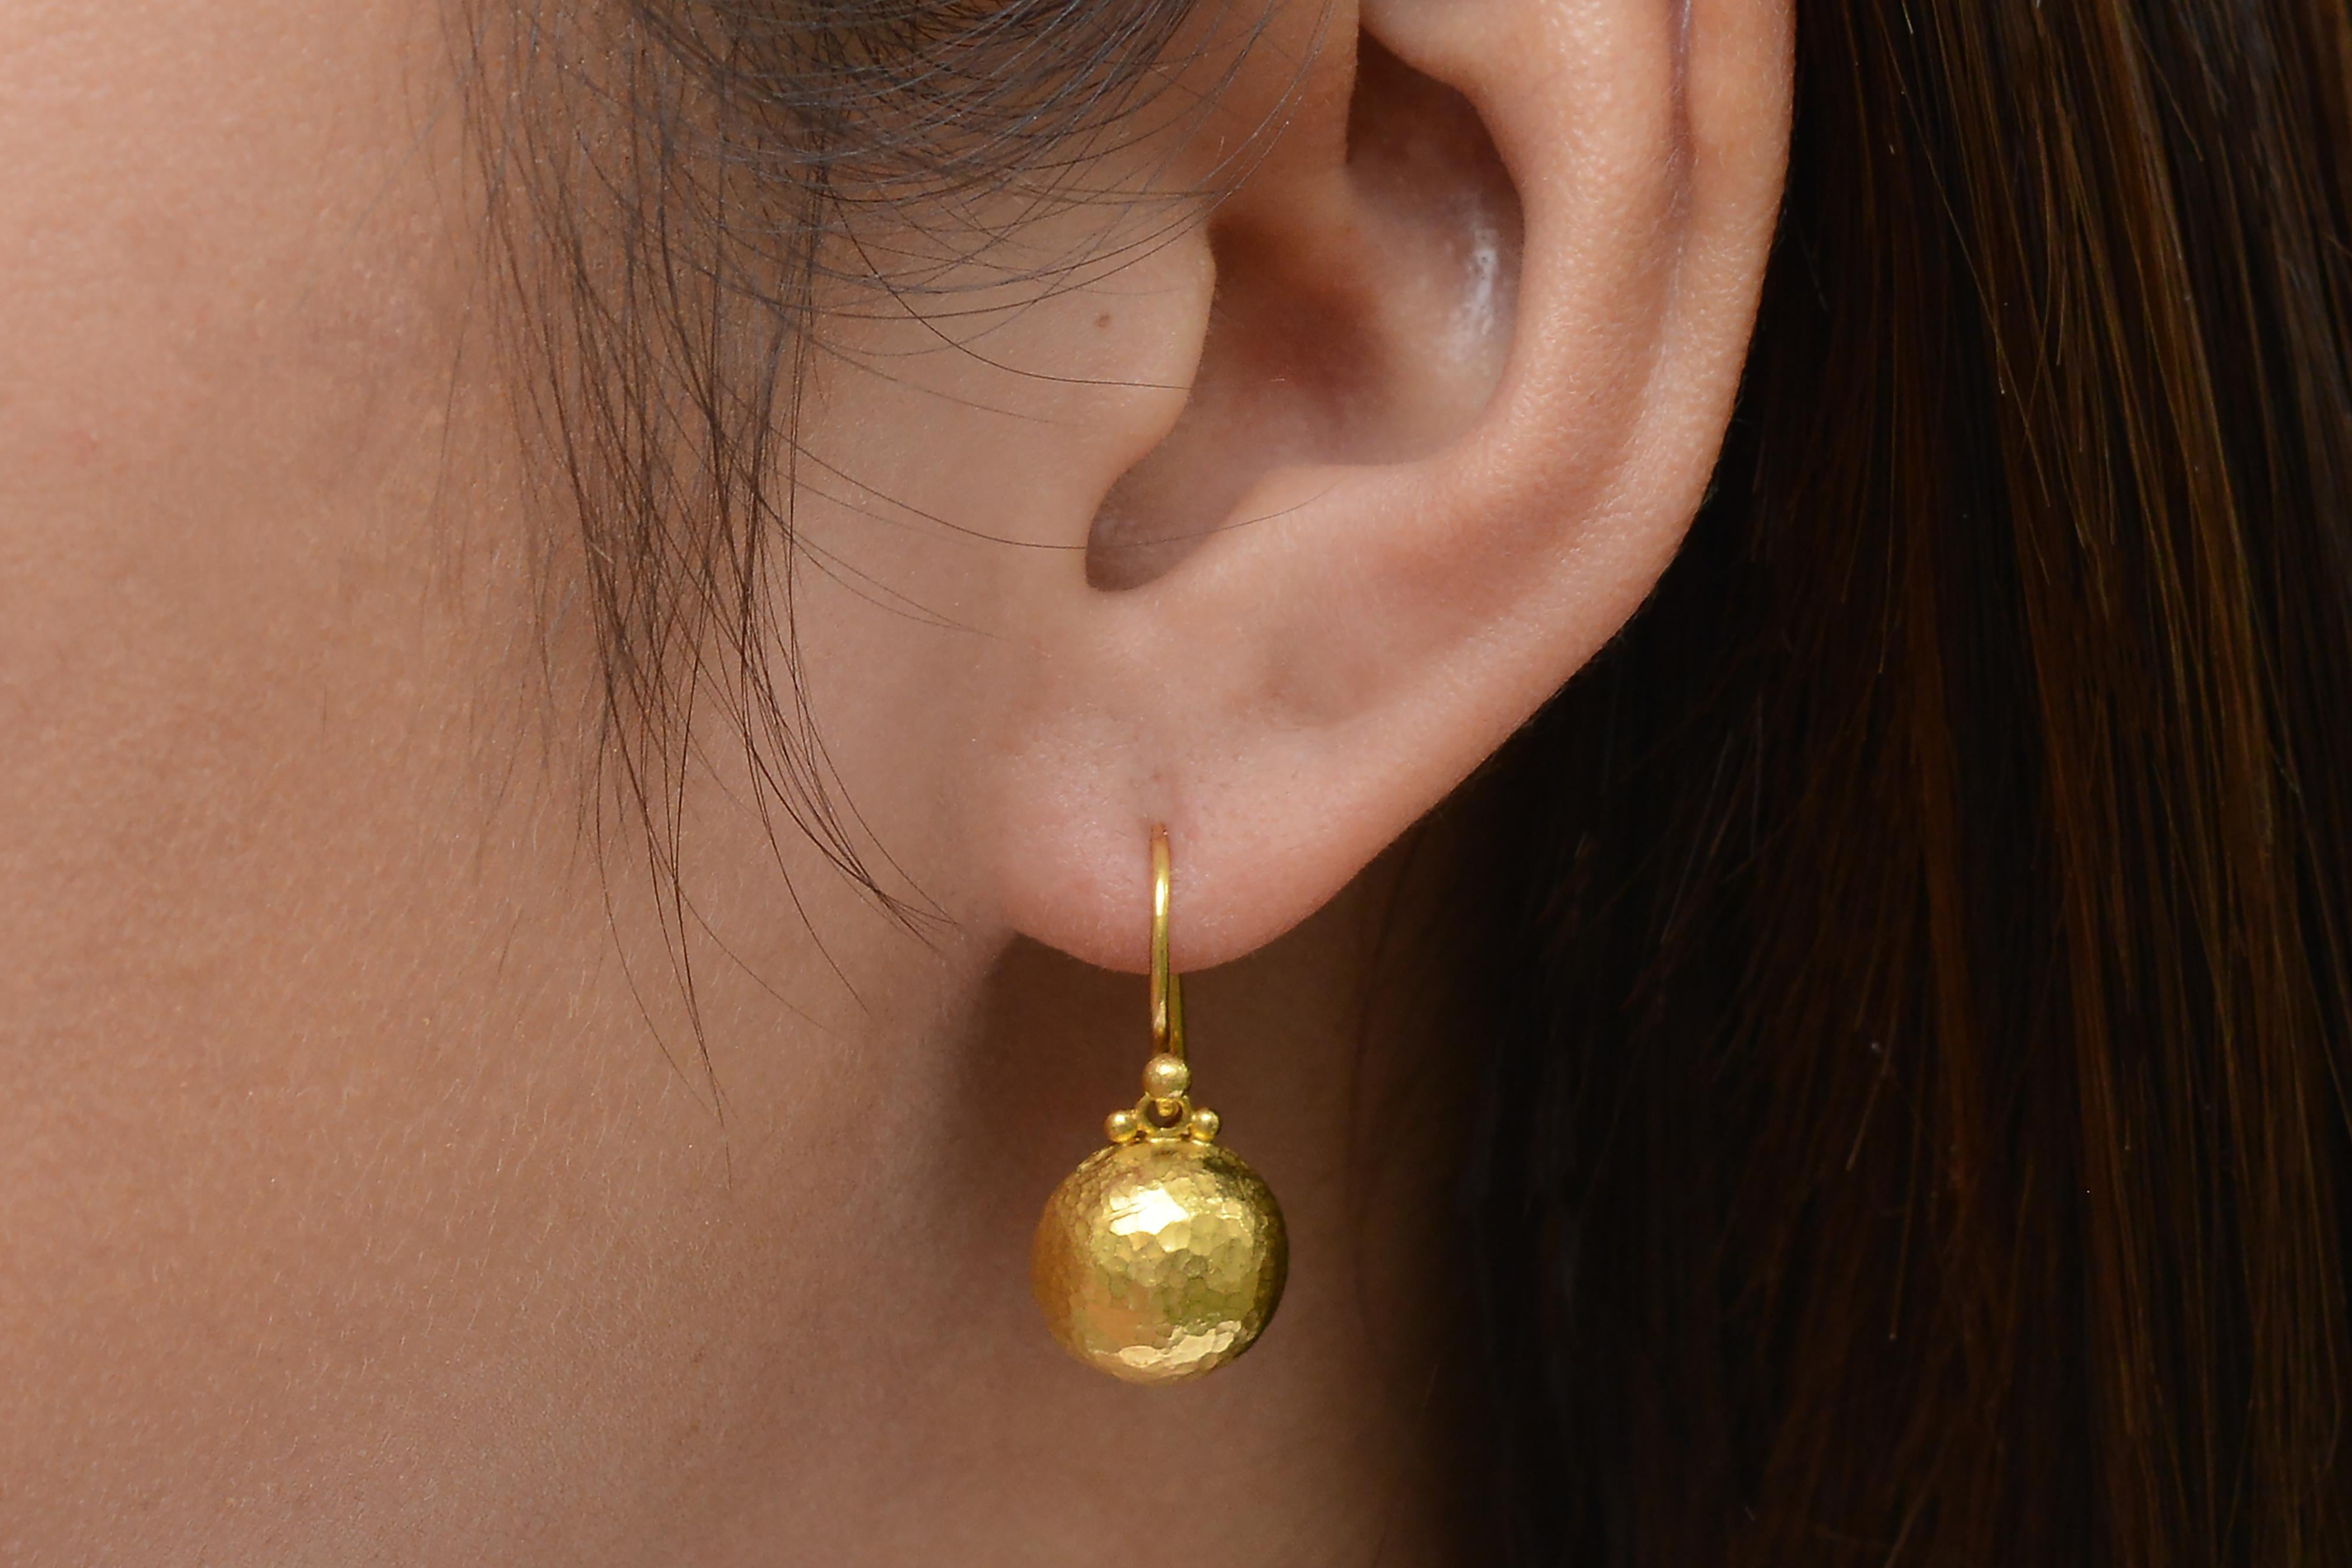 These vintage contemporary 24 karat yellow gold drop earrings by designer Gurhan offer a luxurious accessory at a fine value. With over 99% gold purity the rich, bold color of these earrings are sure to make a lasting statement. You'll love the